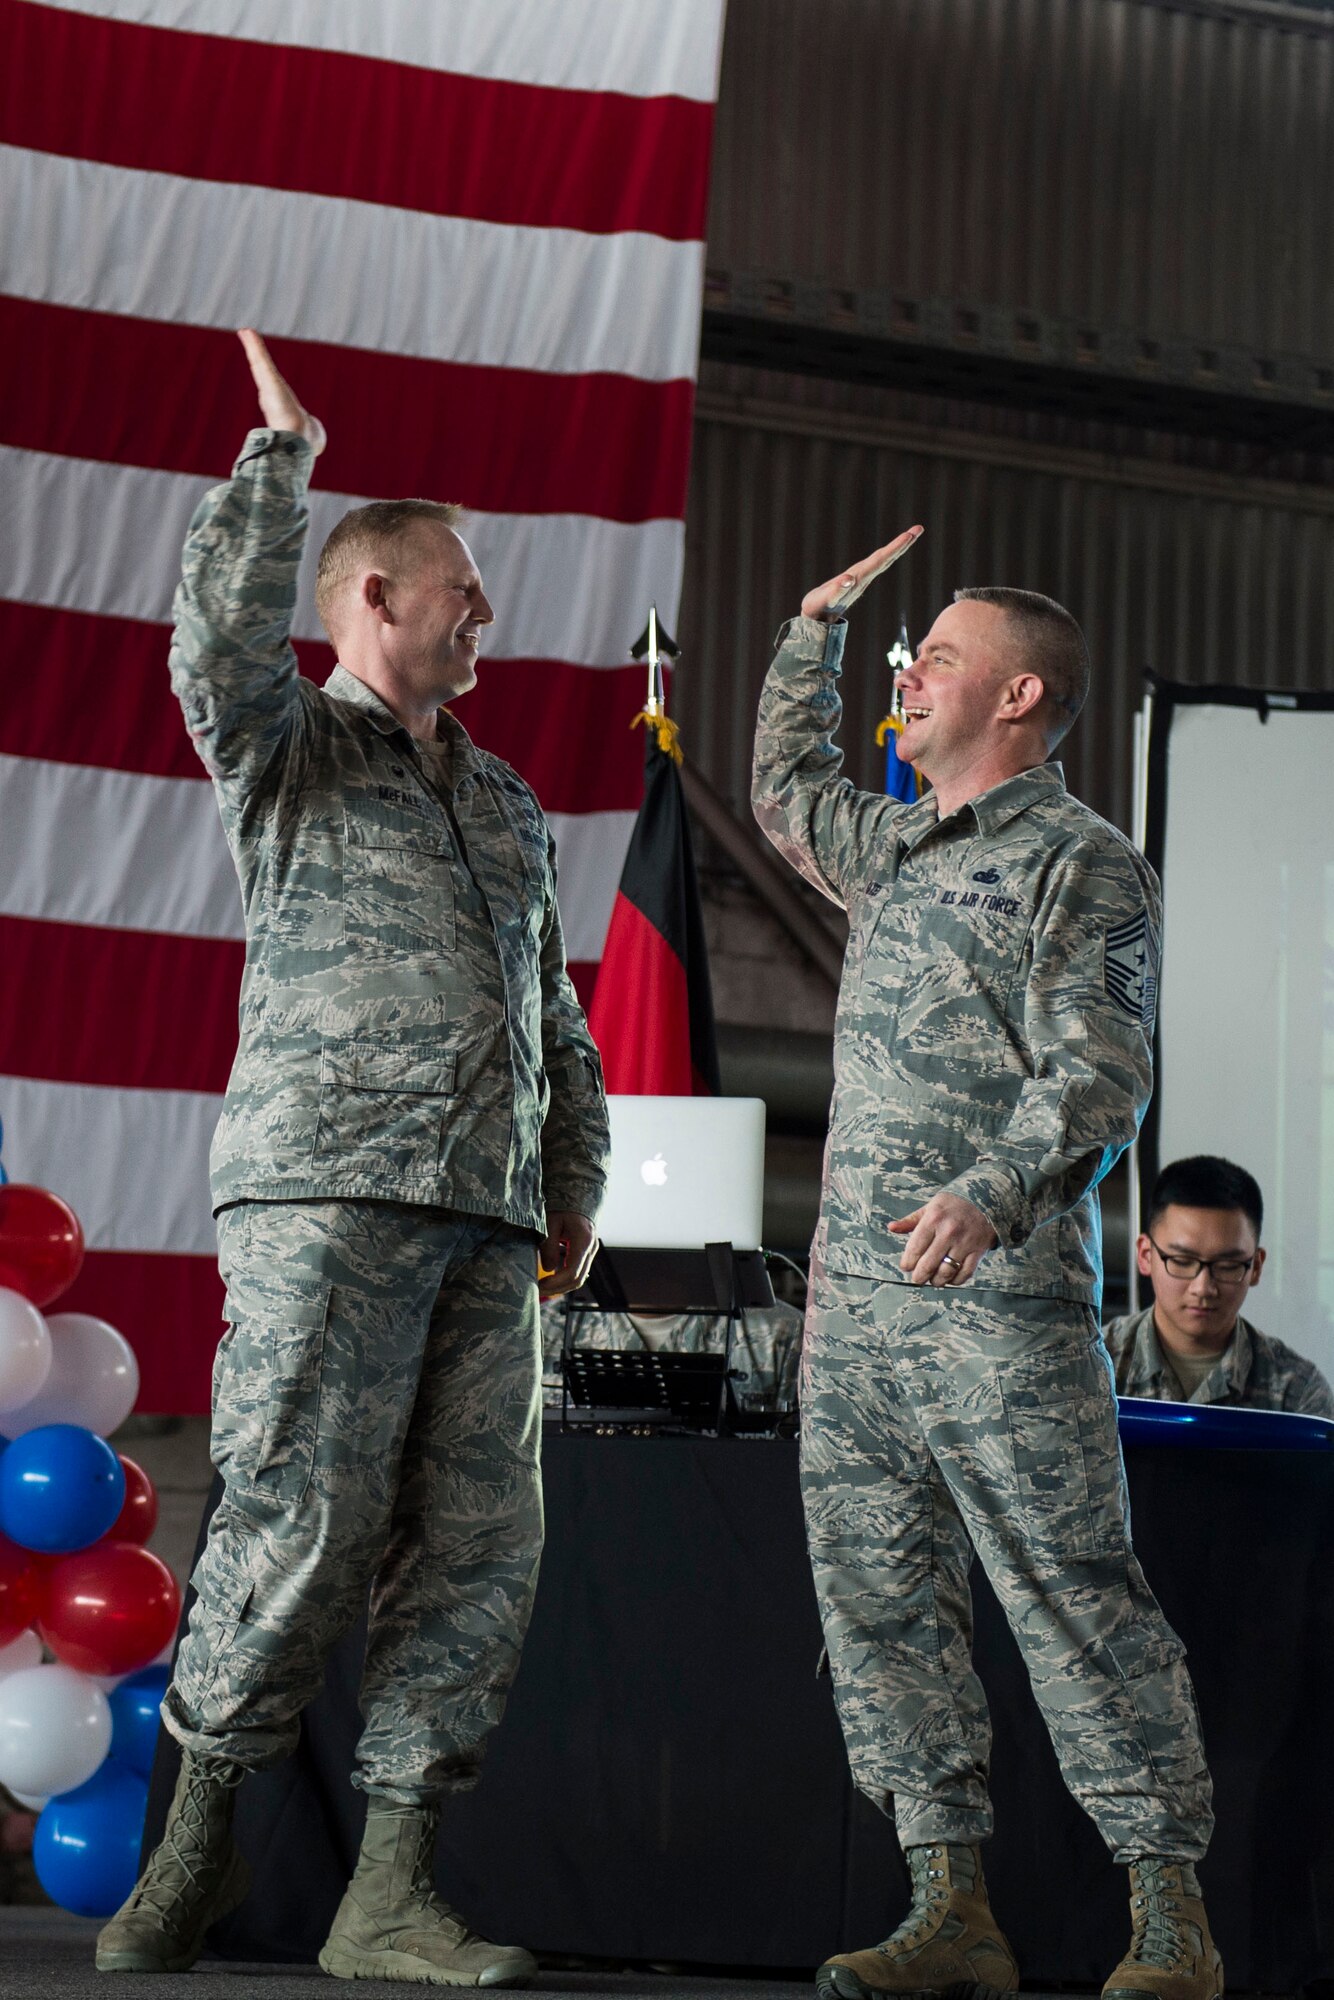 U.S. Air Force Col. Joe McFall, 52nd Fighter Wing commander, left, celebrates with U.S. Air Force Chief Master Sgt. Brian Gates, 52nd FW command chief, during the Year in Review Pep Rally in Hangar 1 at Spangdahlem Air Base, Germany, Feb. 25, 2016. McFall and Gates handed out jerseys to the 52nd Fighter Wing 2015 annual awards nominees to recognize their accomplishments. (U.S. Air Force photo by Airman 1st Class Luke Kitterman/Released)